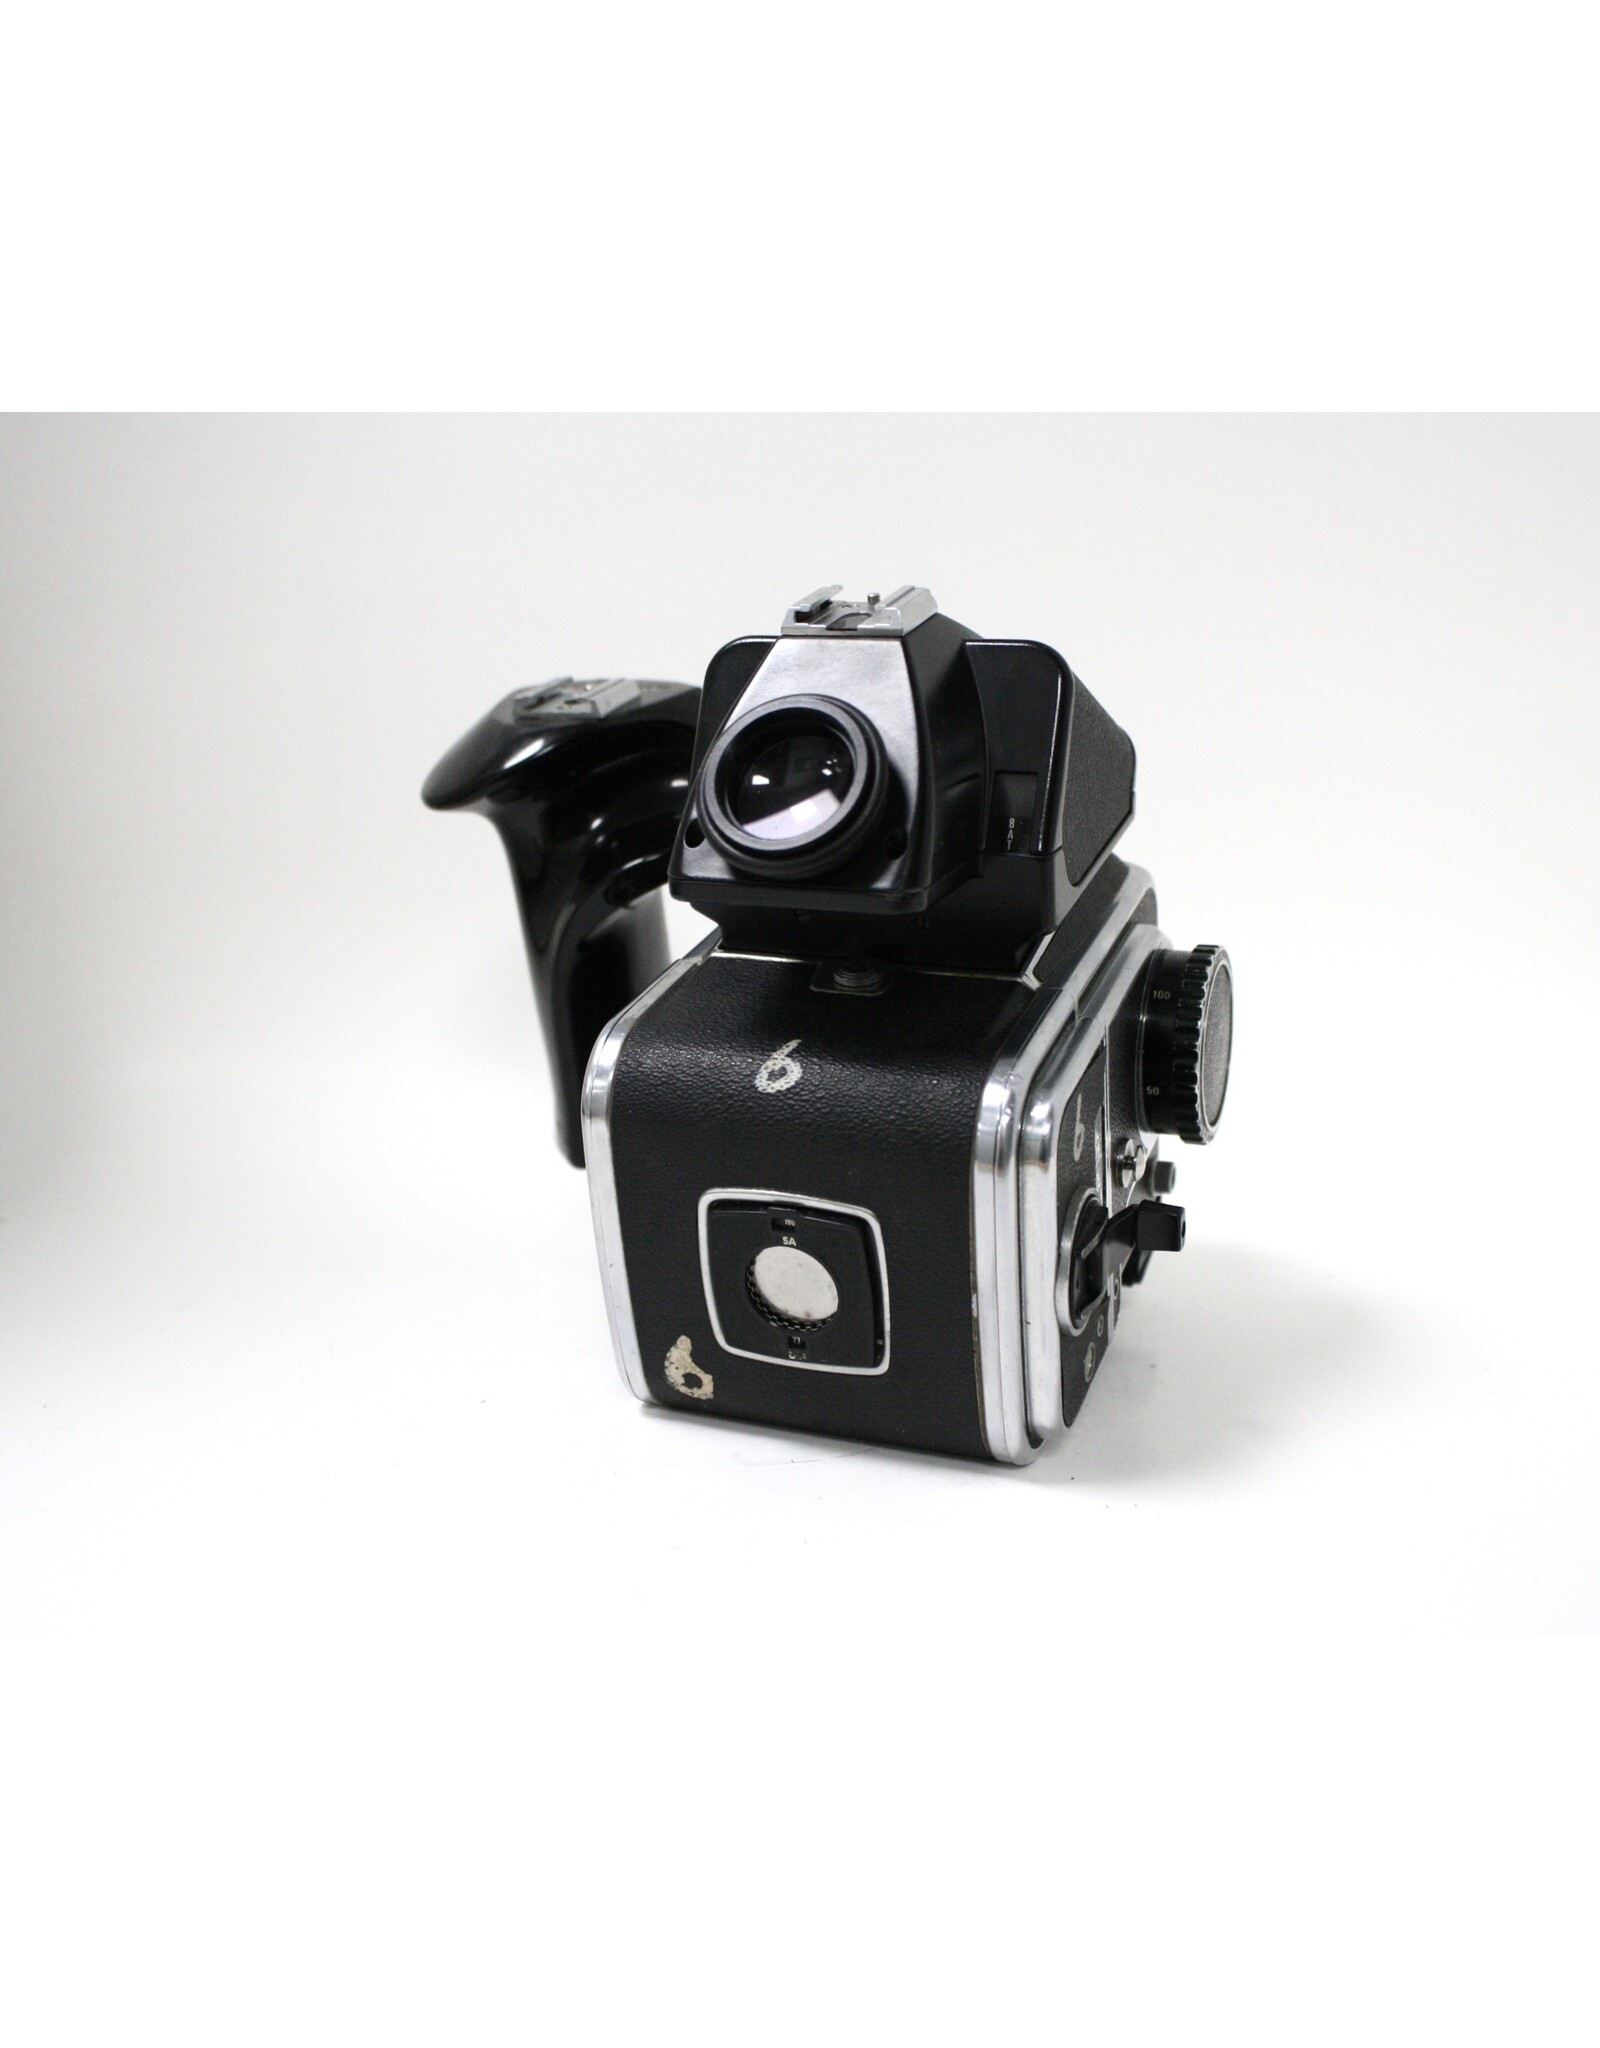 Hasselblad Hasselblad 1000F Chrome SLR Camera Zeiss Tessar 2.8/80mm lens with Metered Prism